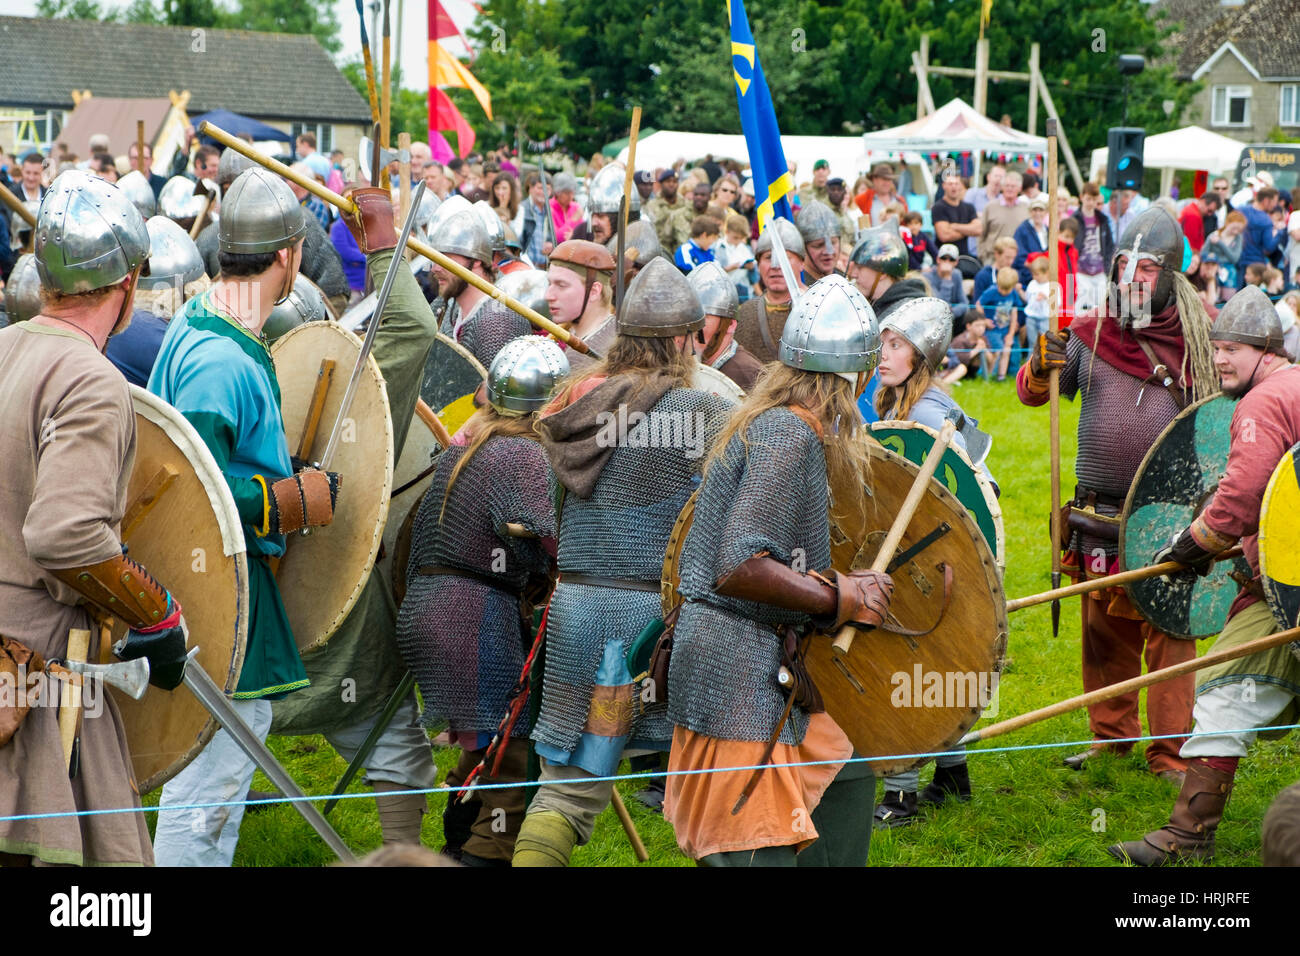 KING CNUT / CANUTE King of England (1016-35) and Denmark (1018-35). Date:  11th century Stock Photo - Alamy